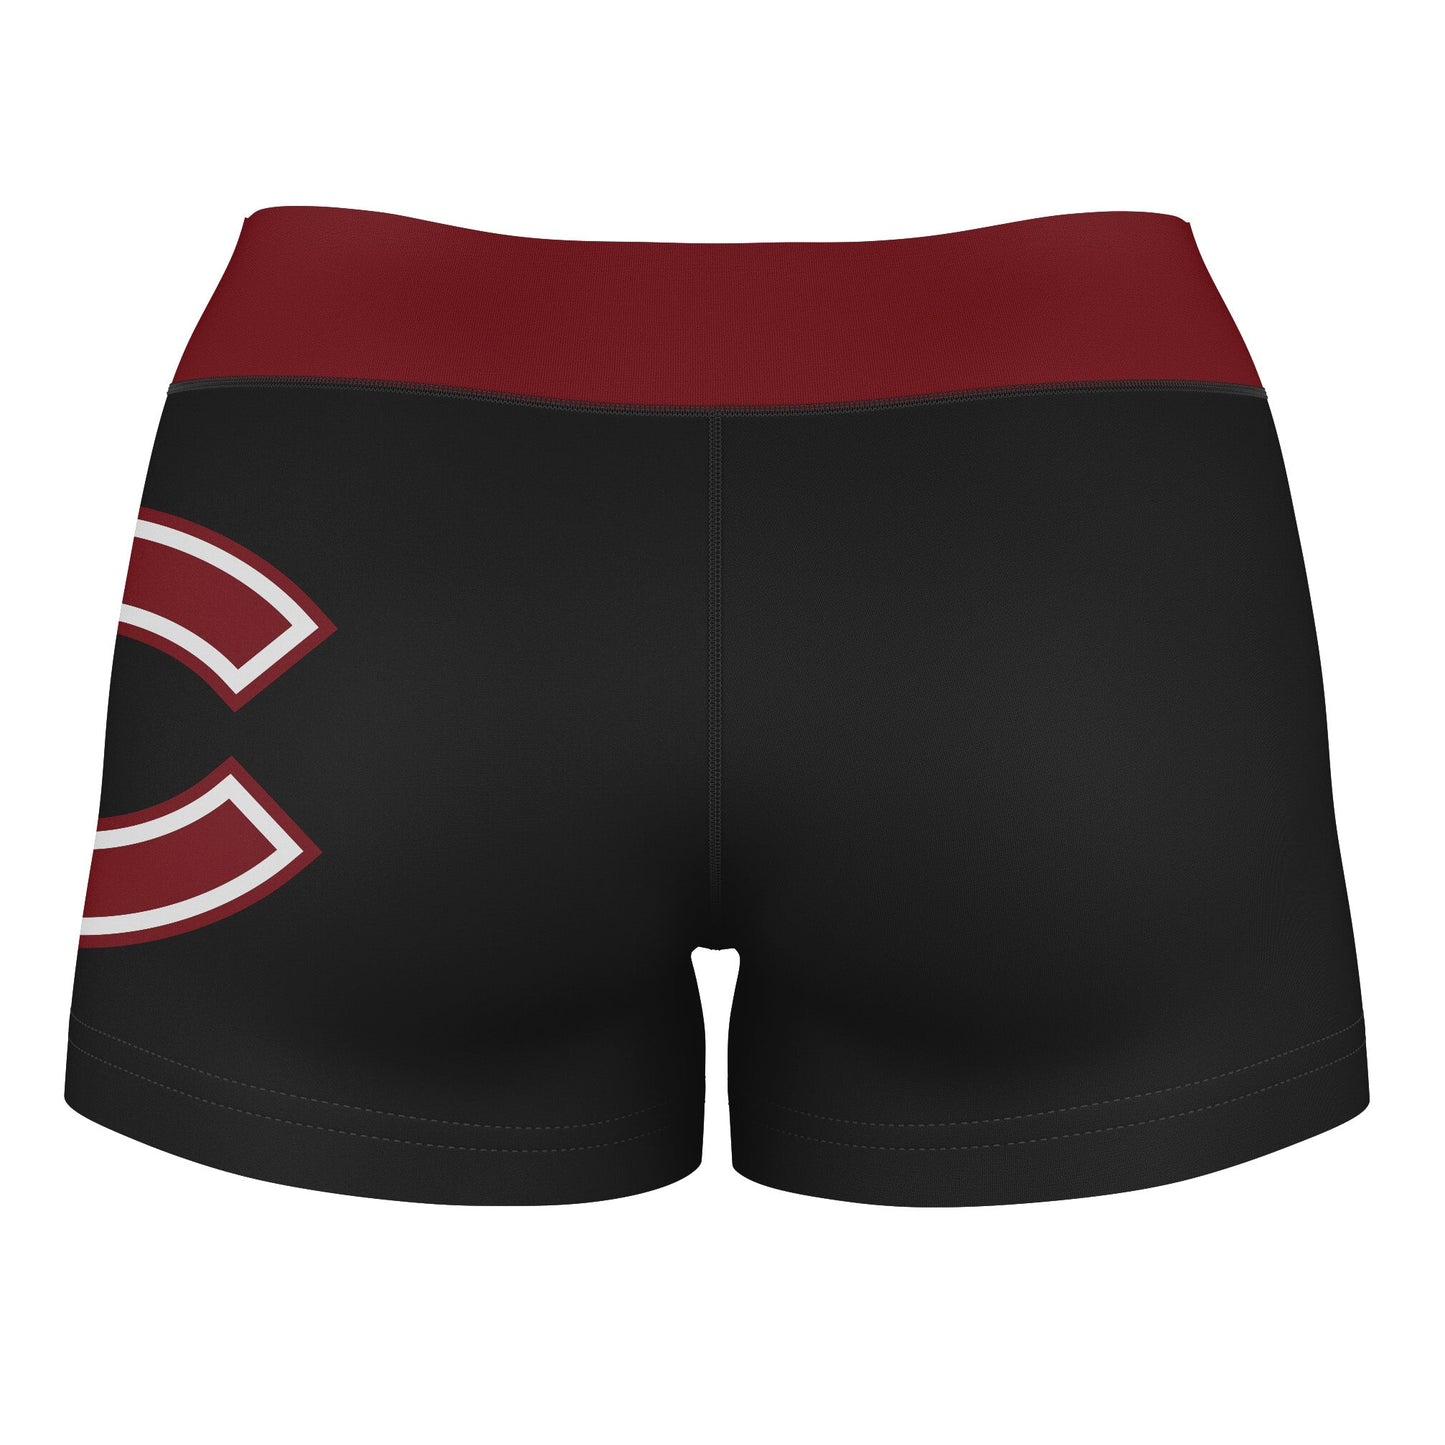 Colgate Raiders Vive La Fete Logo on Thigh and Waistband Black and Maroon Women Yoga Booty Workout Shorts 3.75 Inseam" - Vive La F̻te - Online Apparel Store